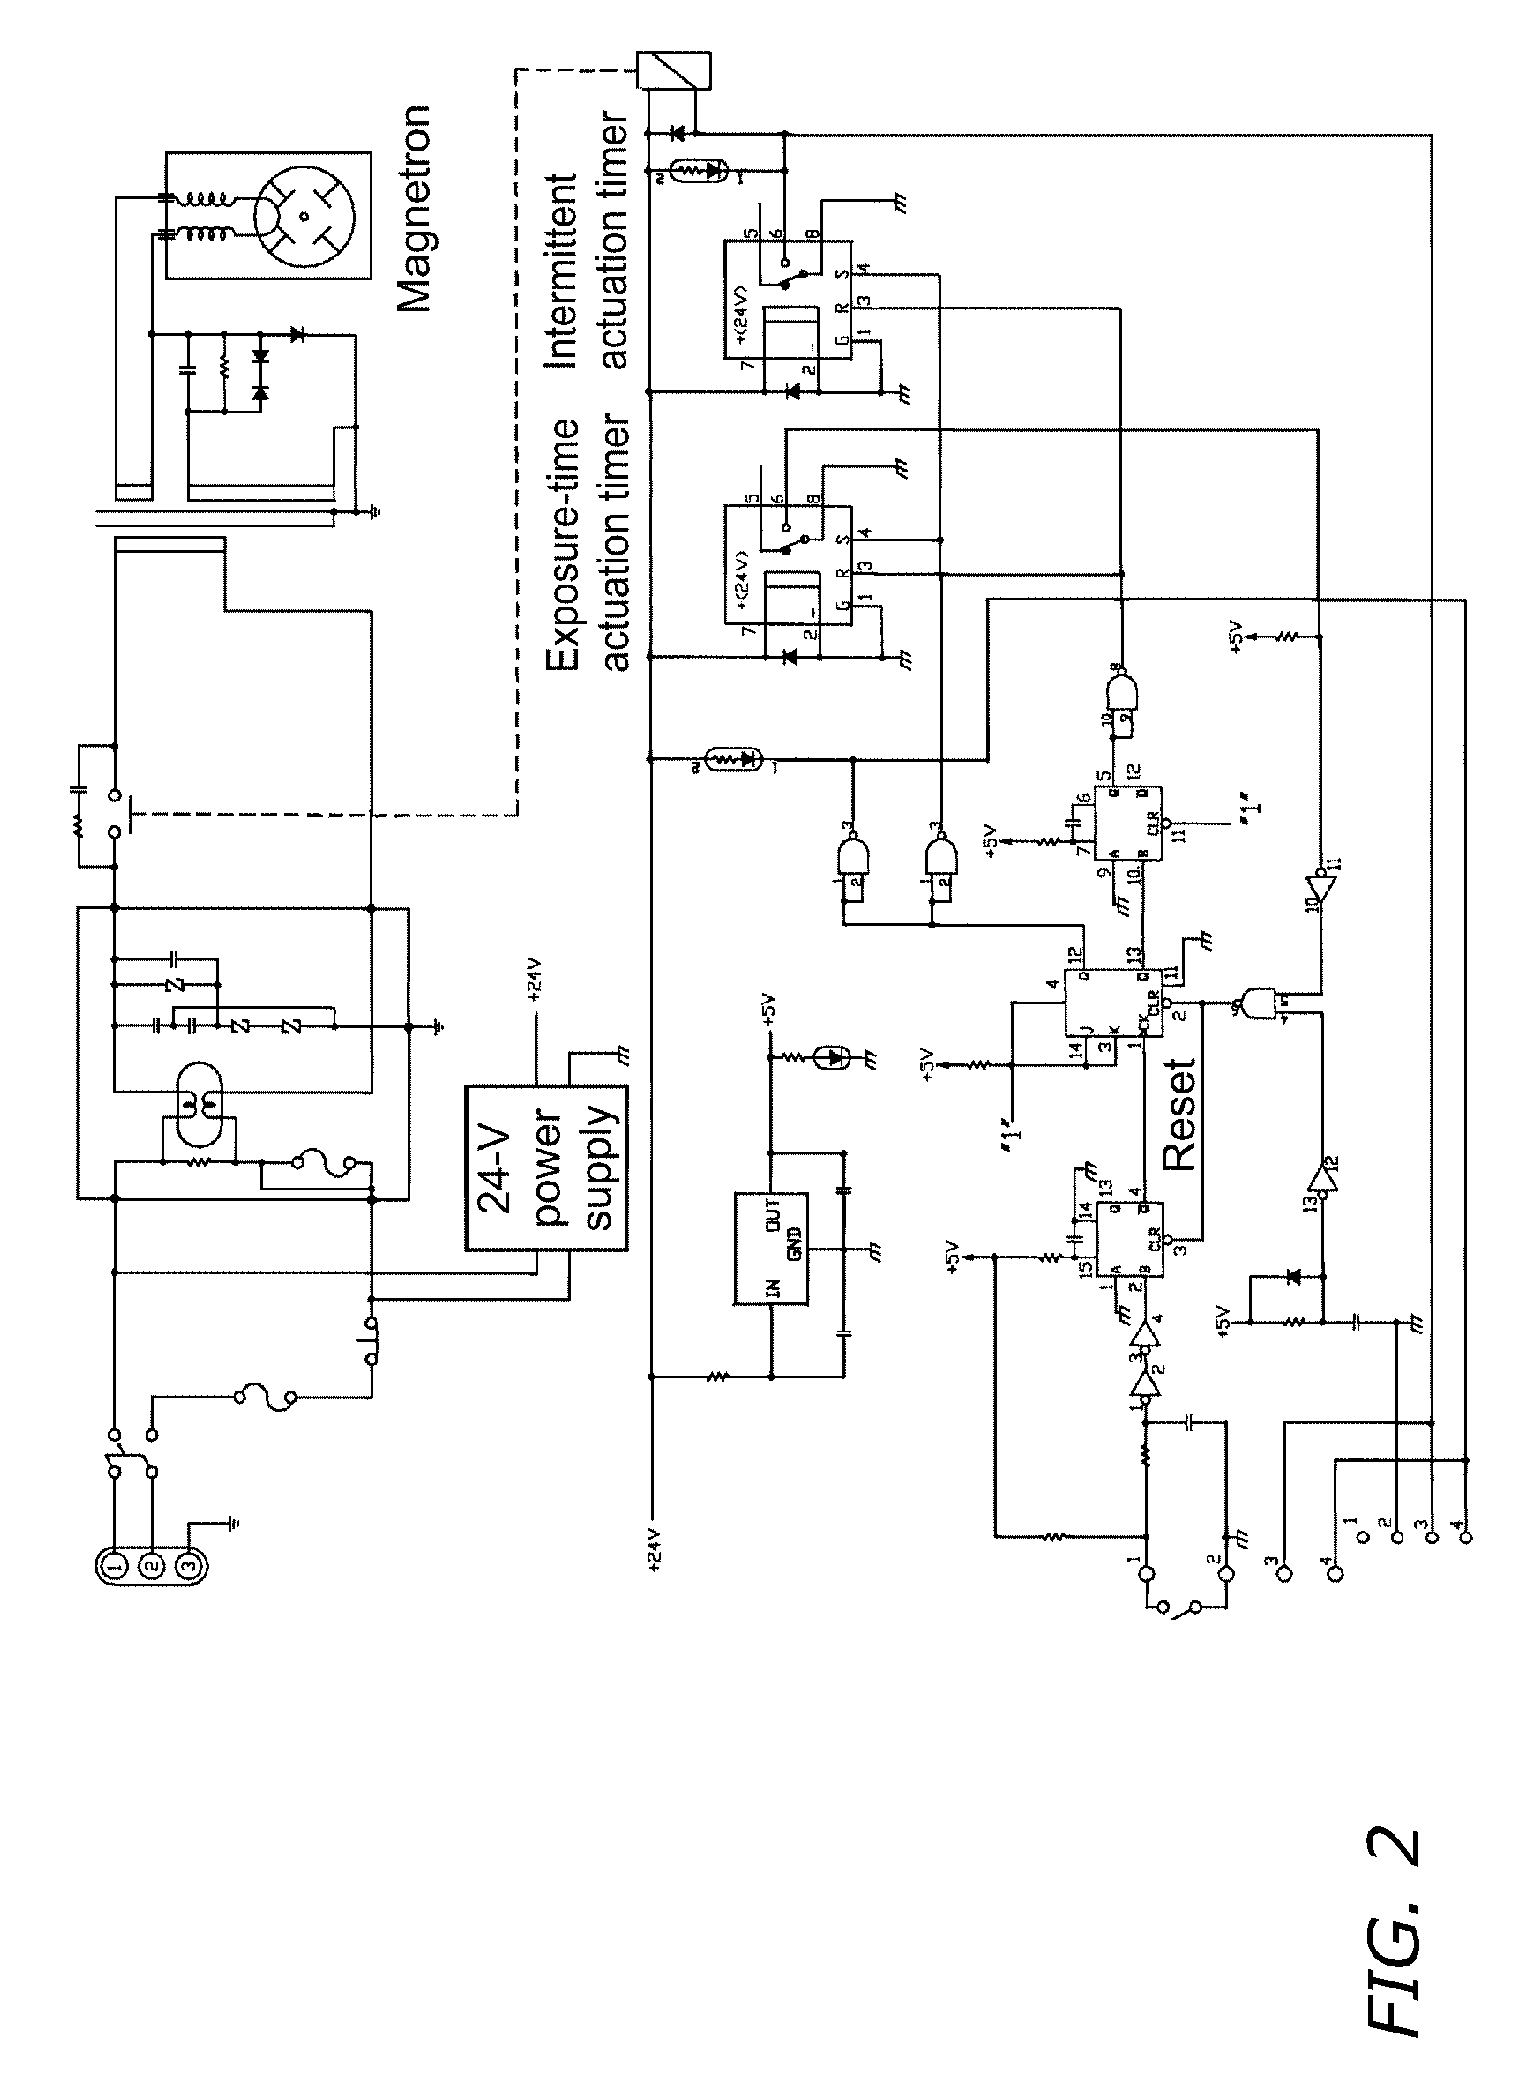 Microwave hyperthermia treatment apparatus and treatment system